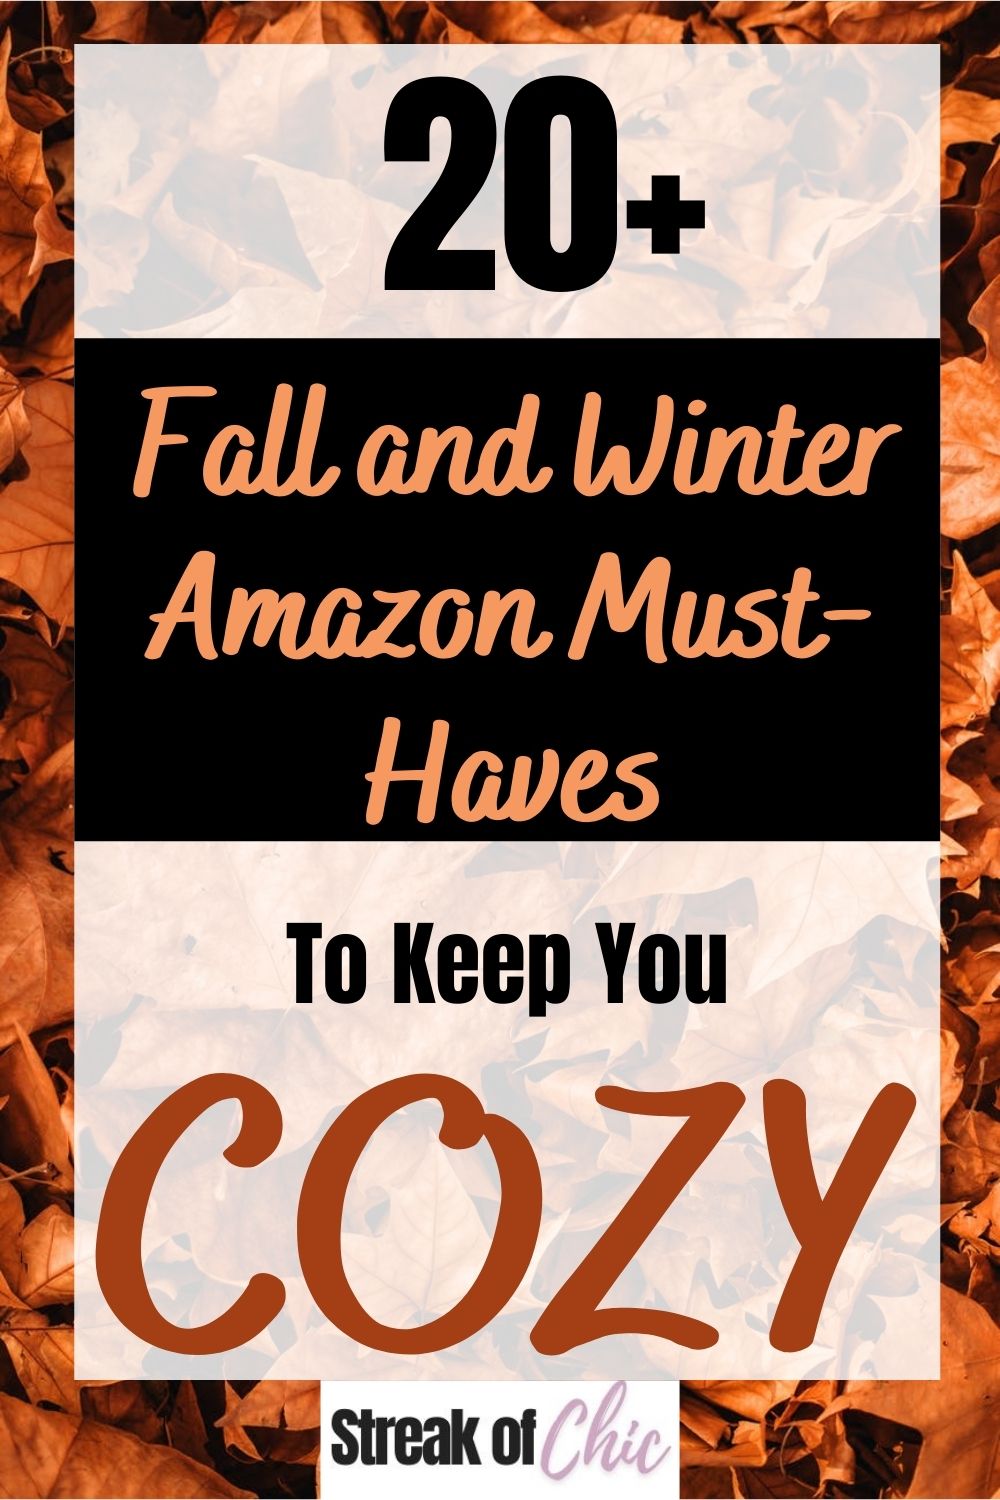 20+ Cozy Fall and Winter Amazon Must-Haves You’ll Love